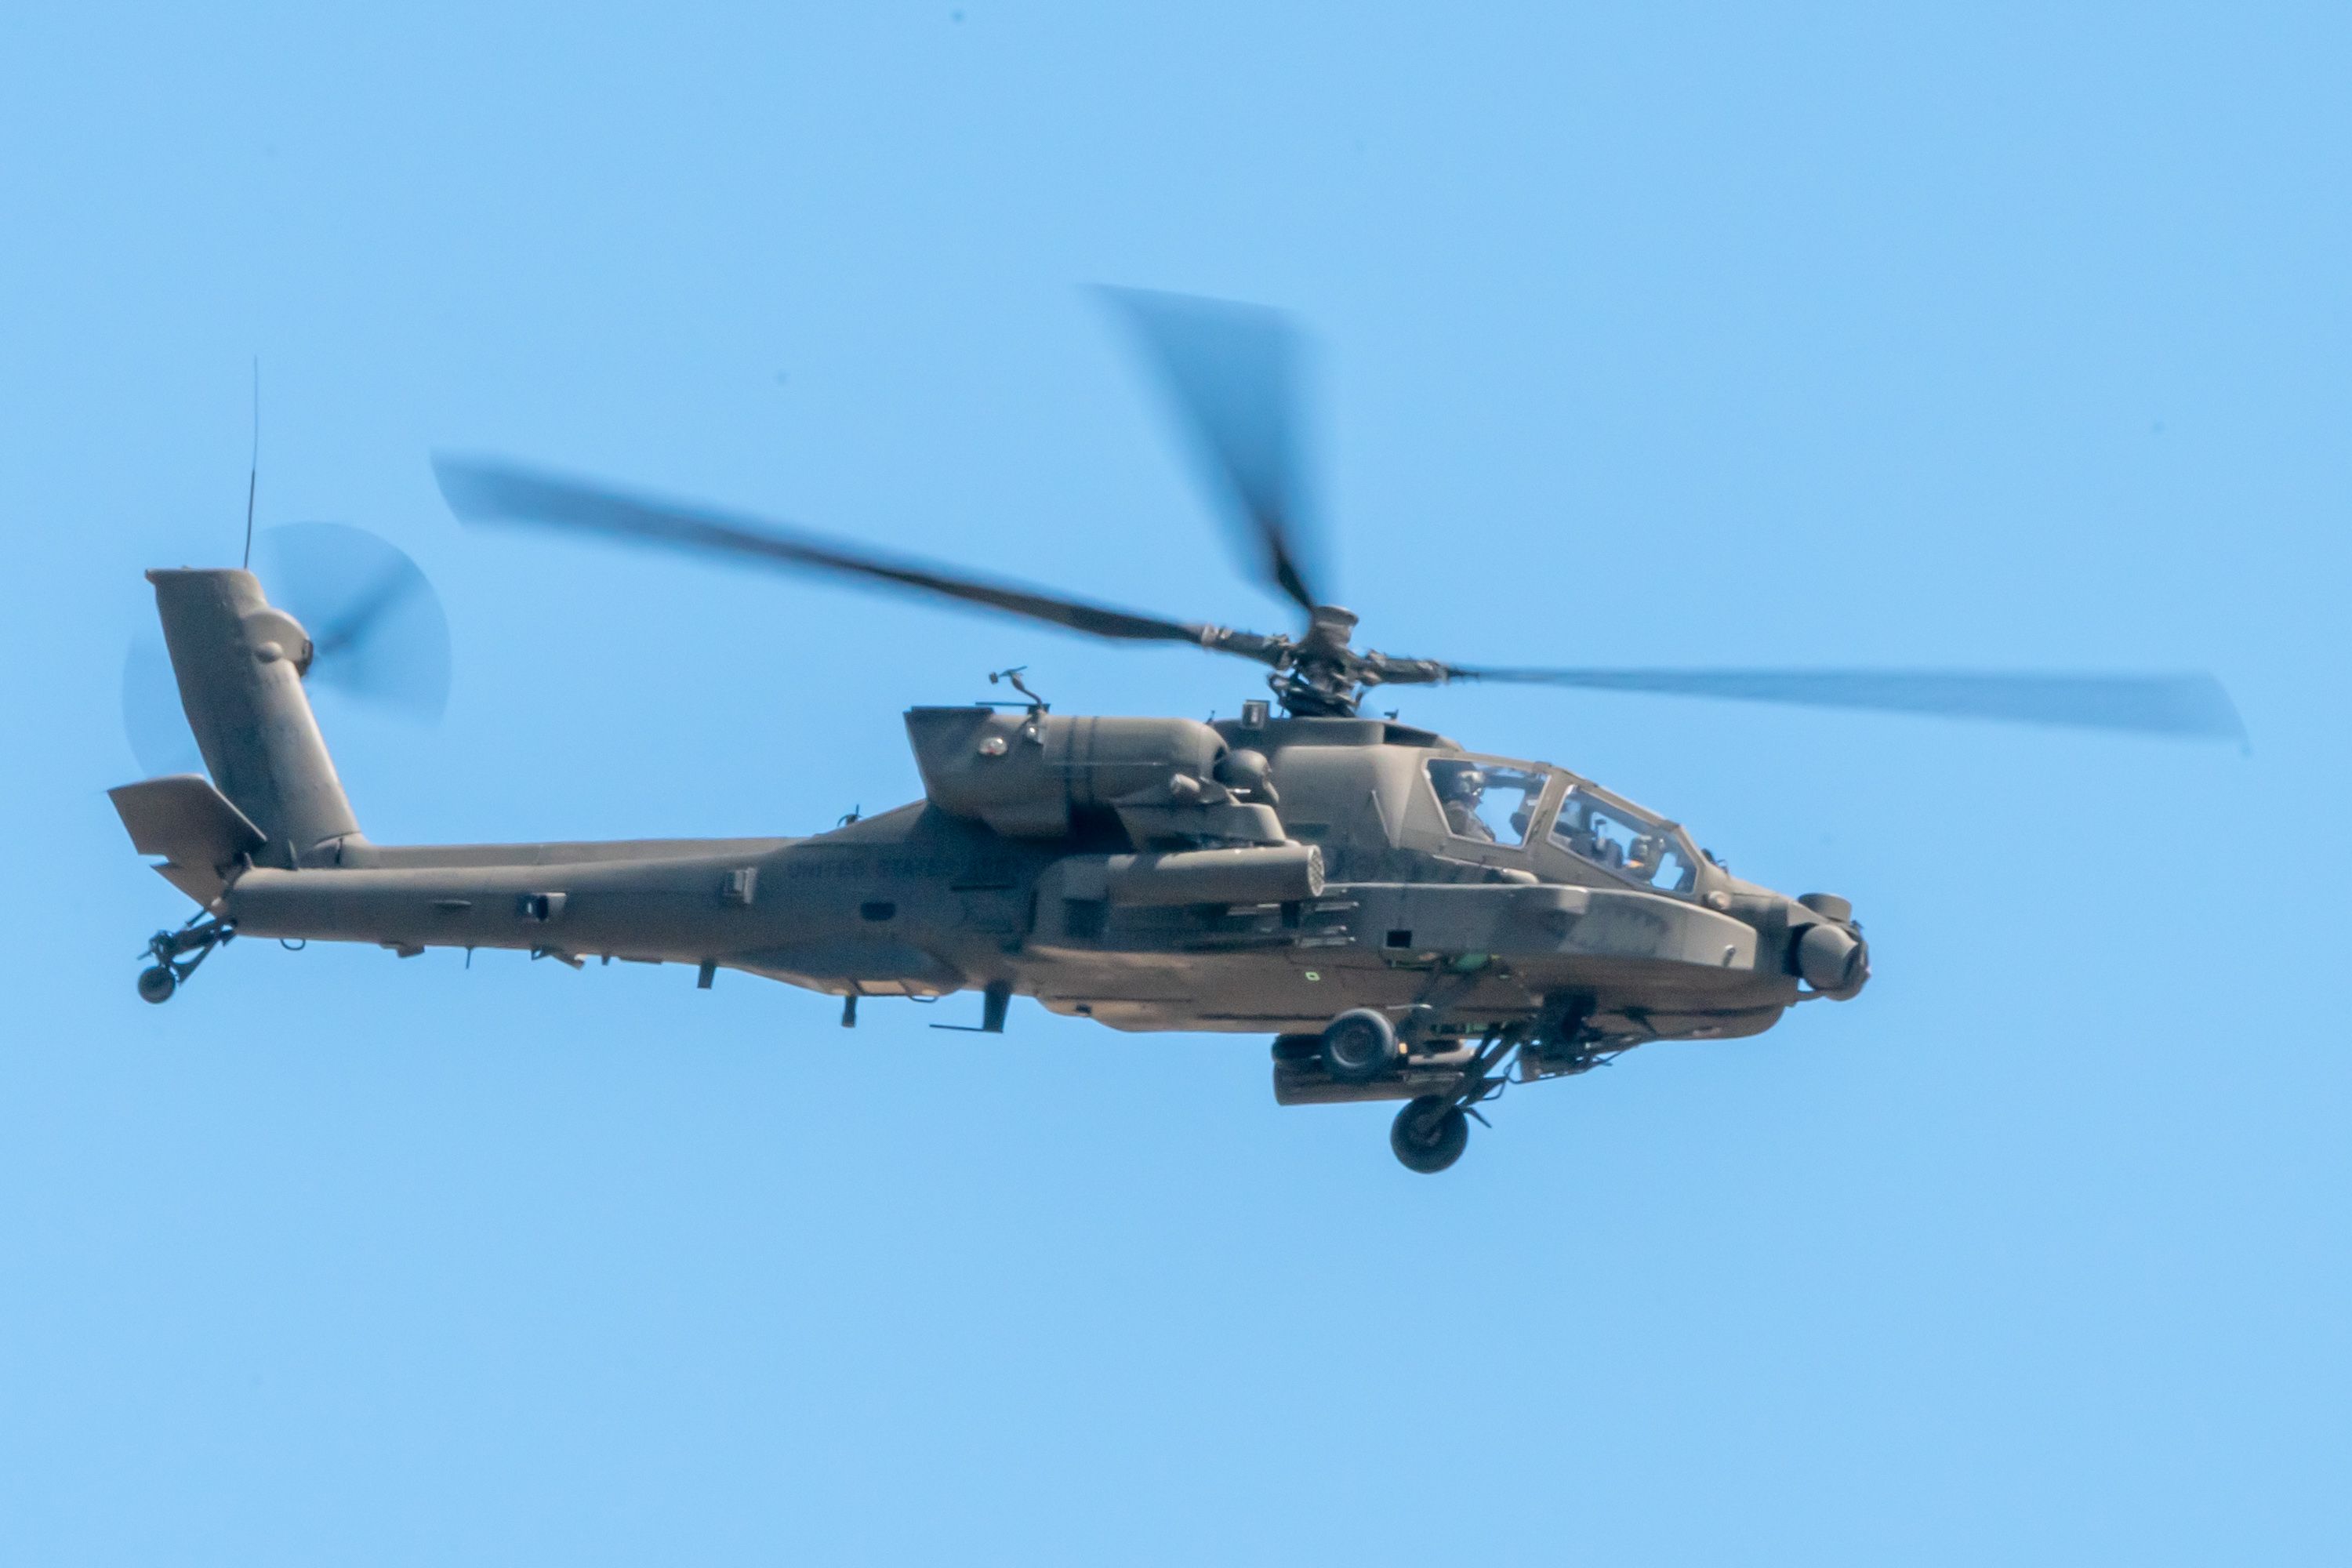 A Boeing AH-64 Apache flying in the sky.